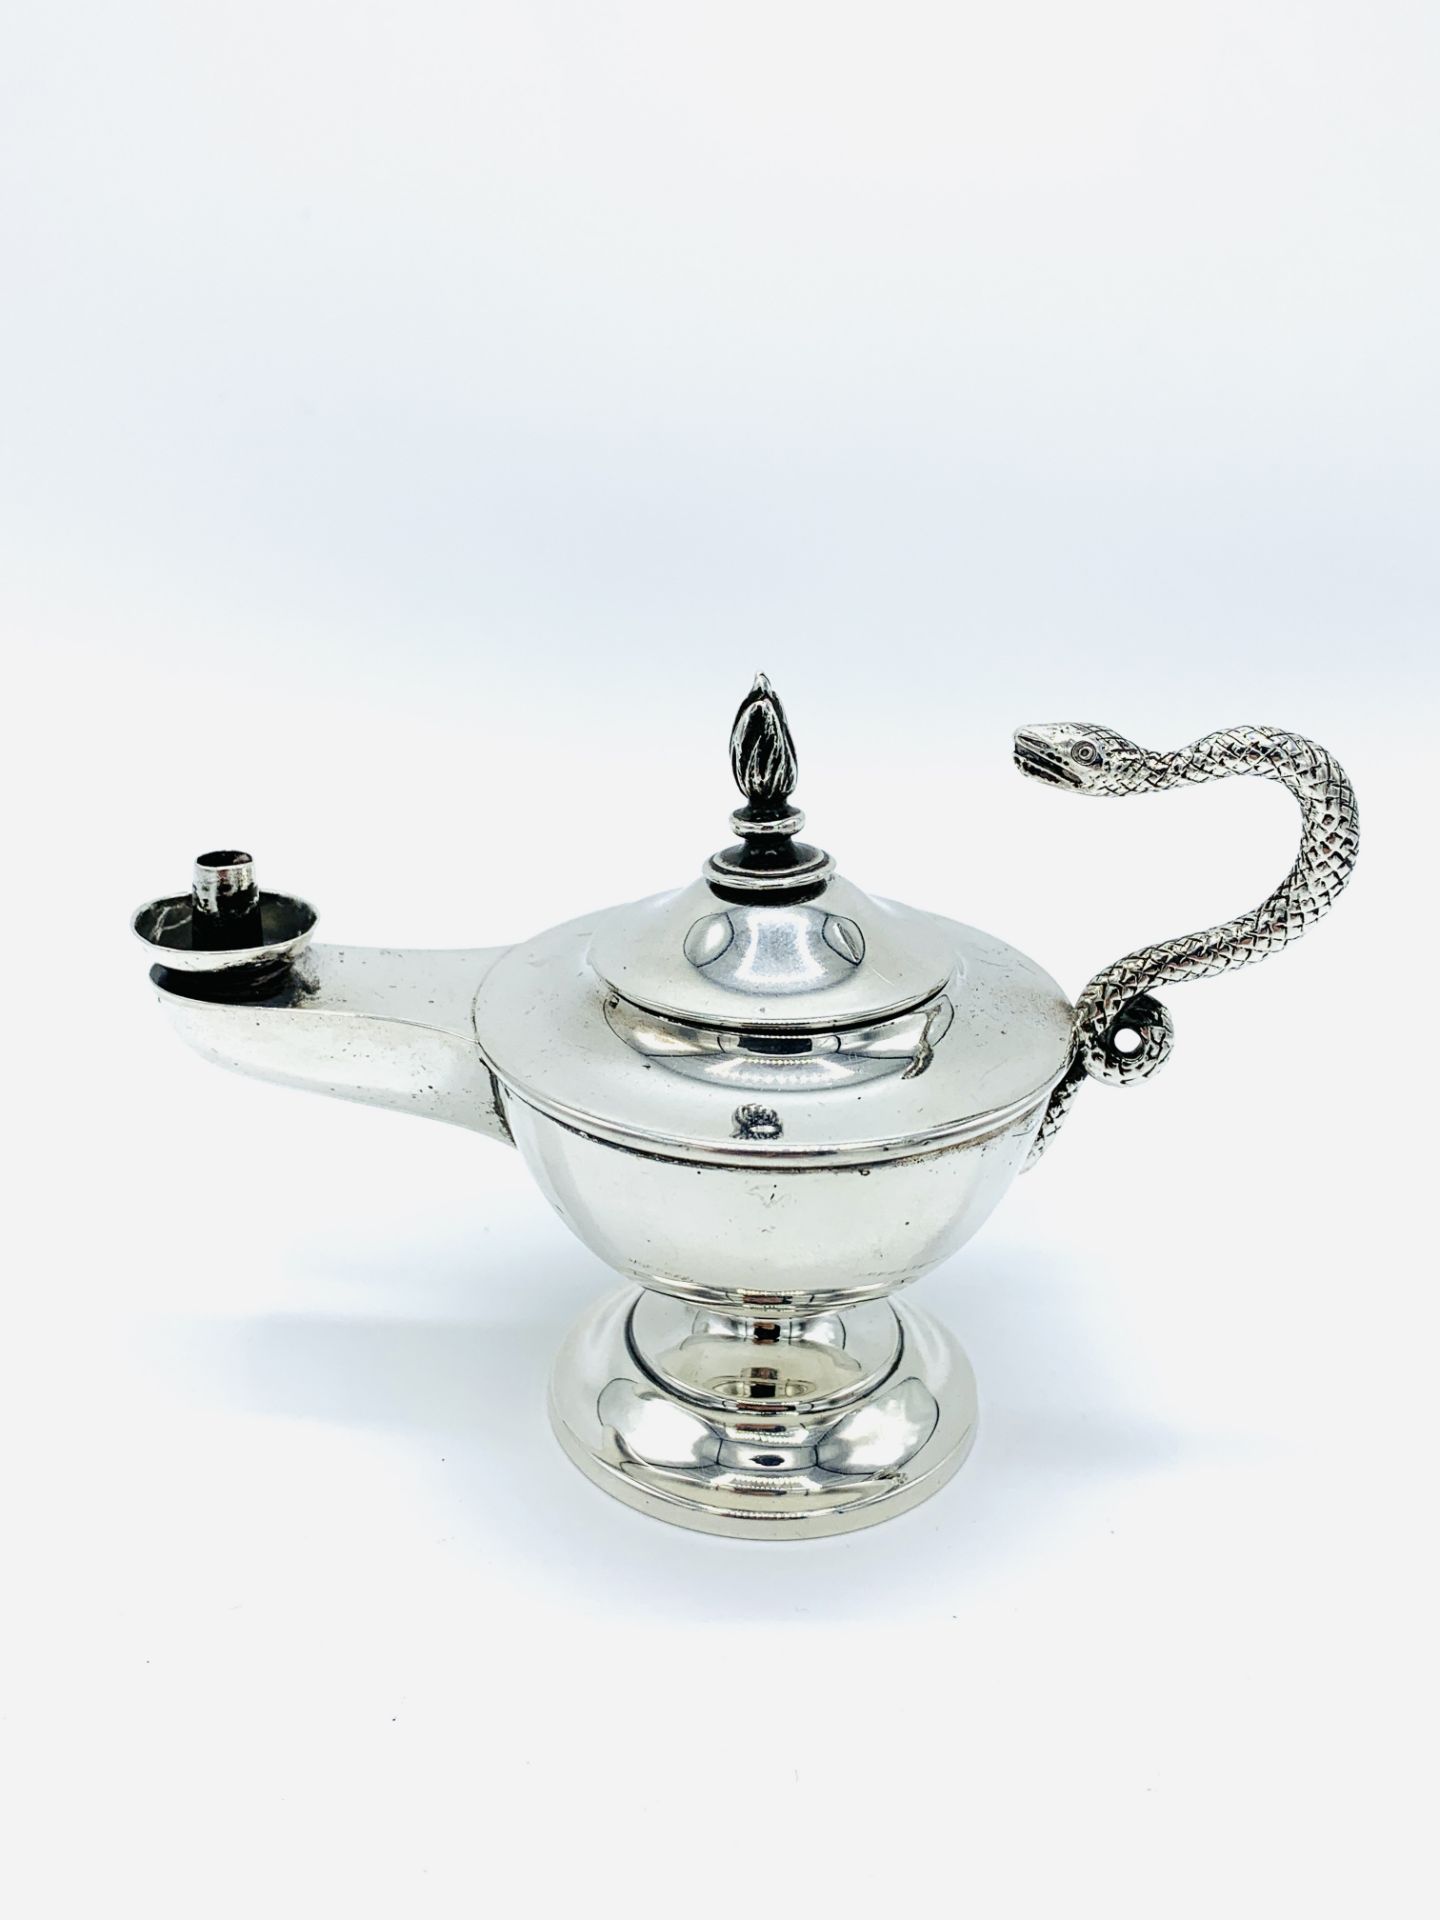 Aladdin's lamp style table/cigar lighter, with serpent handle. - Image 2 of 3